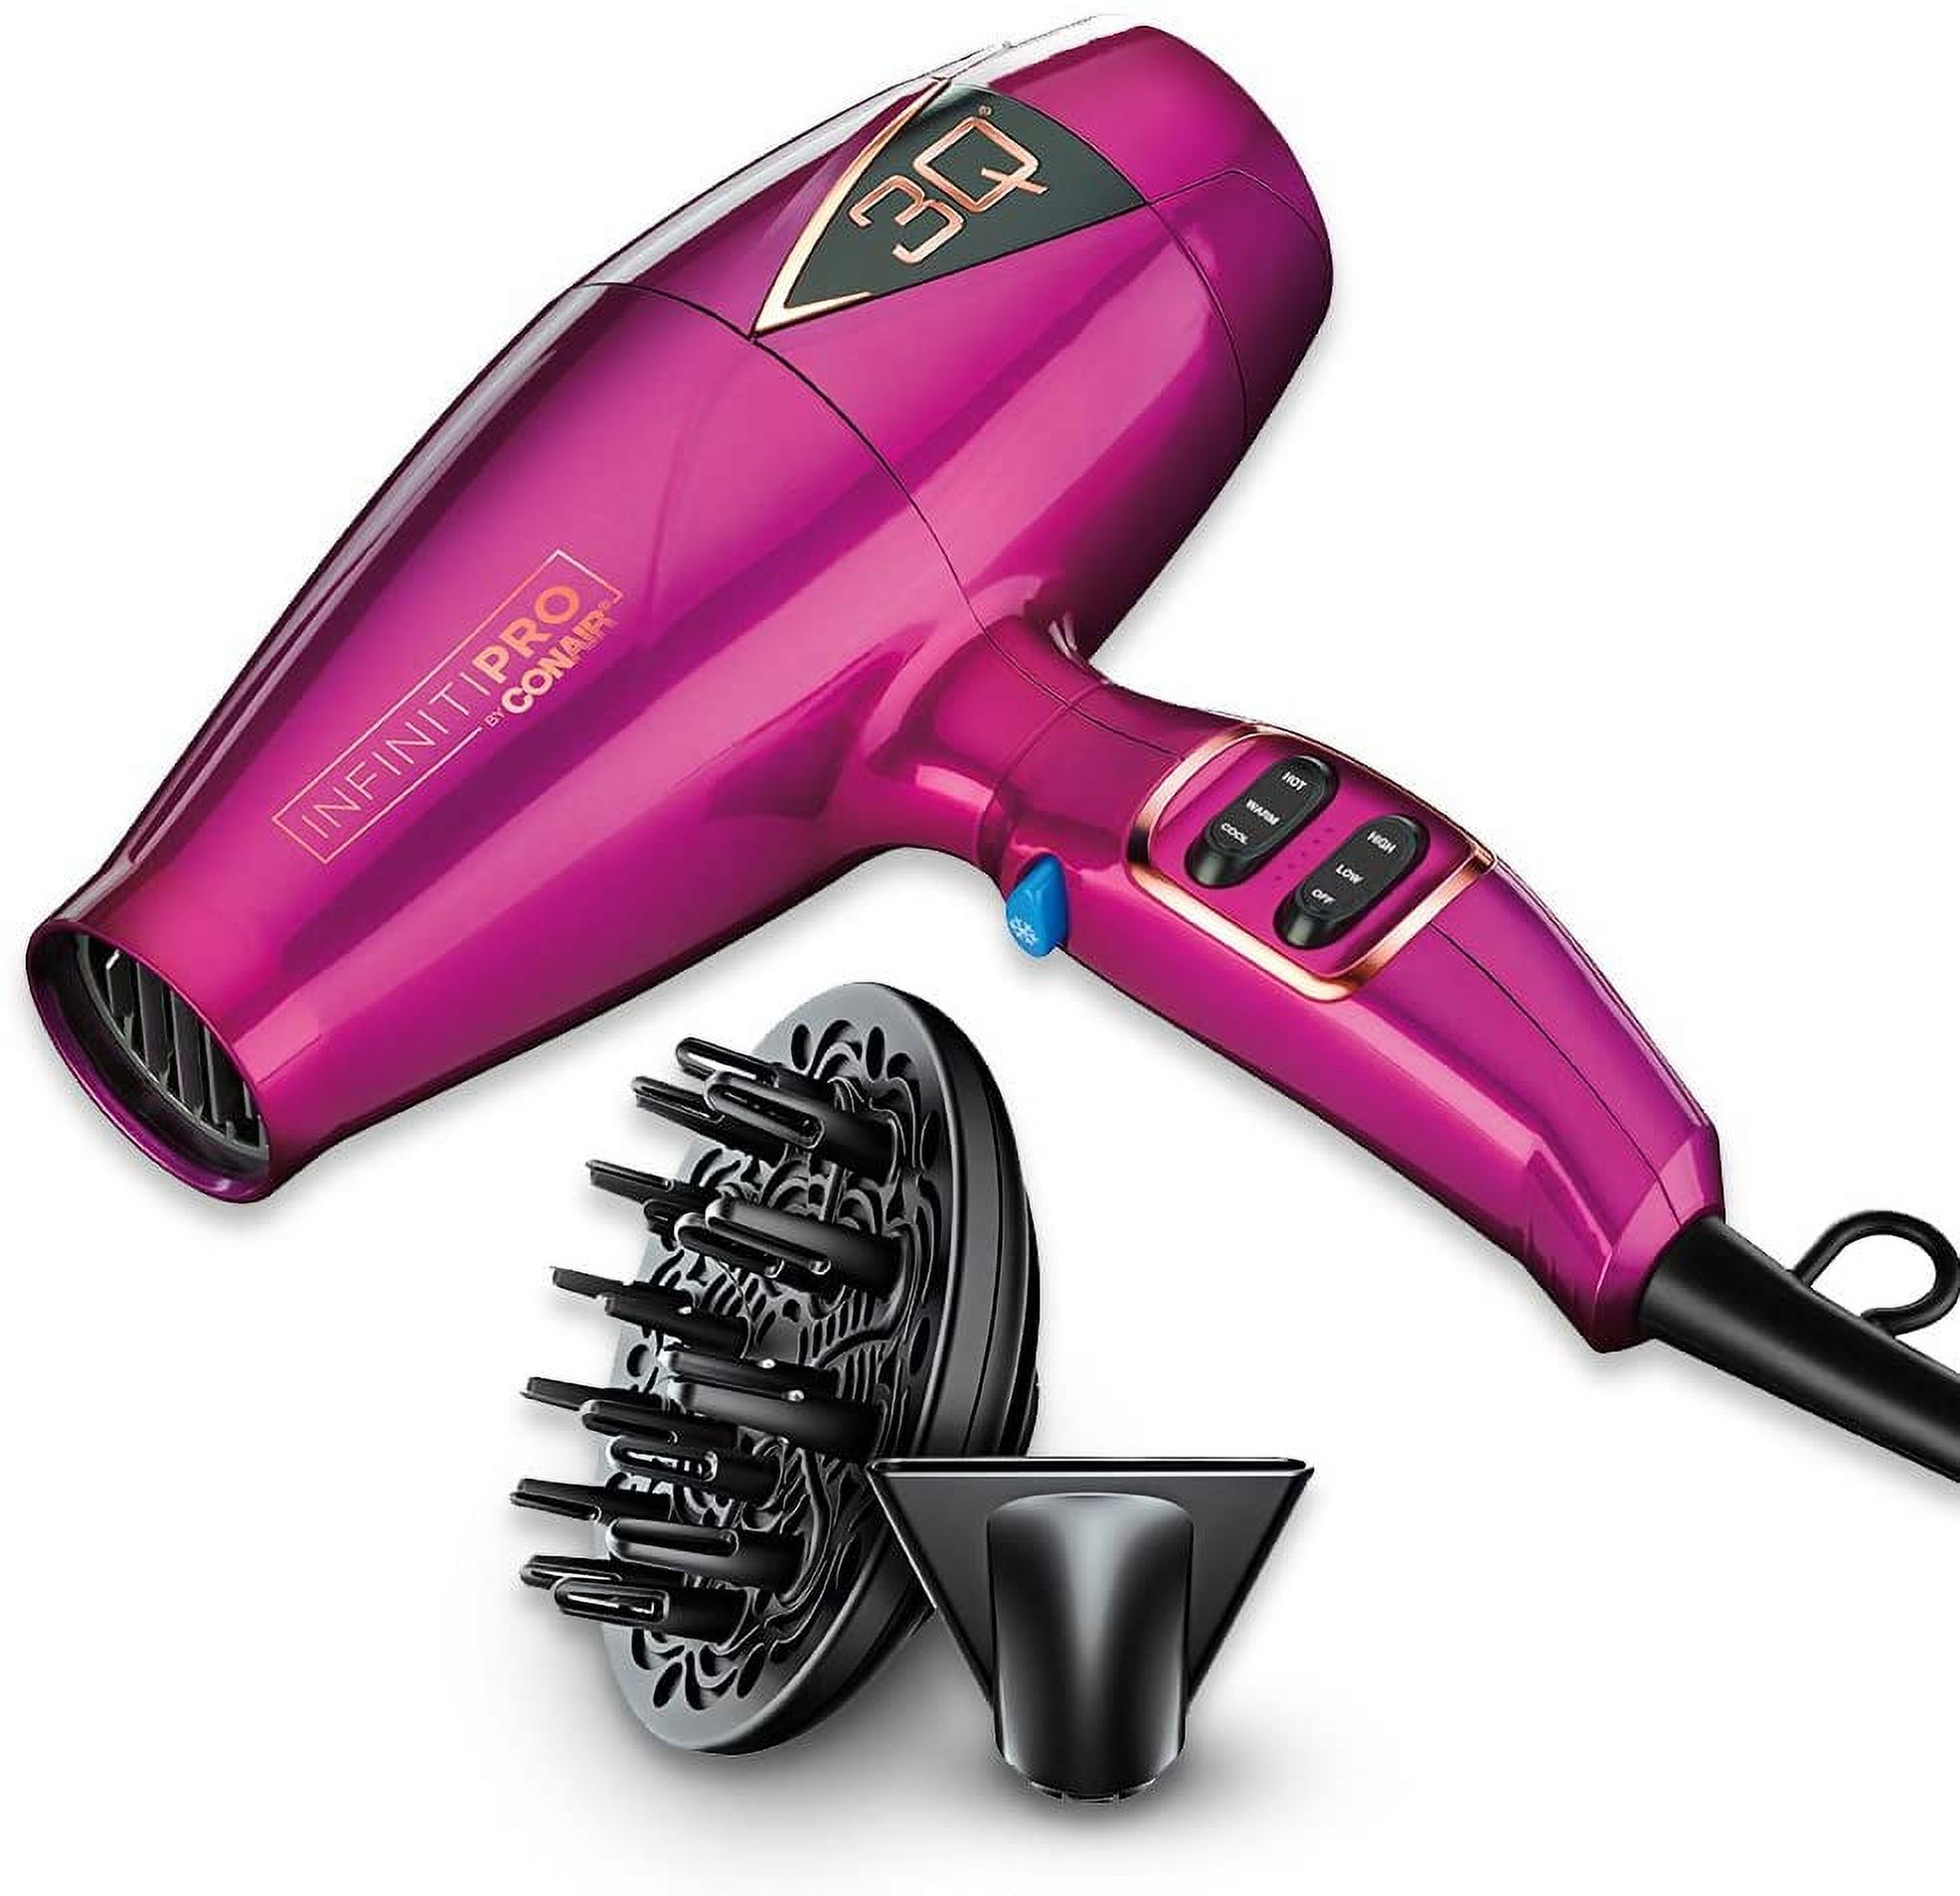 InfinitiPRO by Conair 3Q HeatProtect Hair Dryer, Pink, 3QMS - image 1 of 15